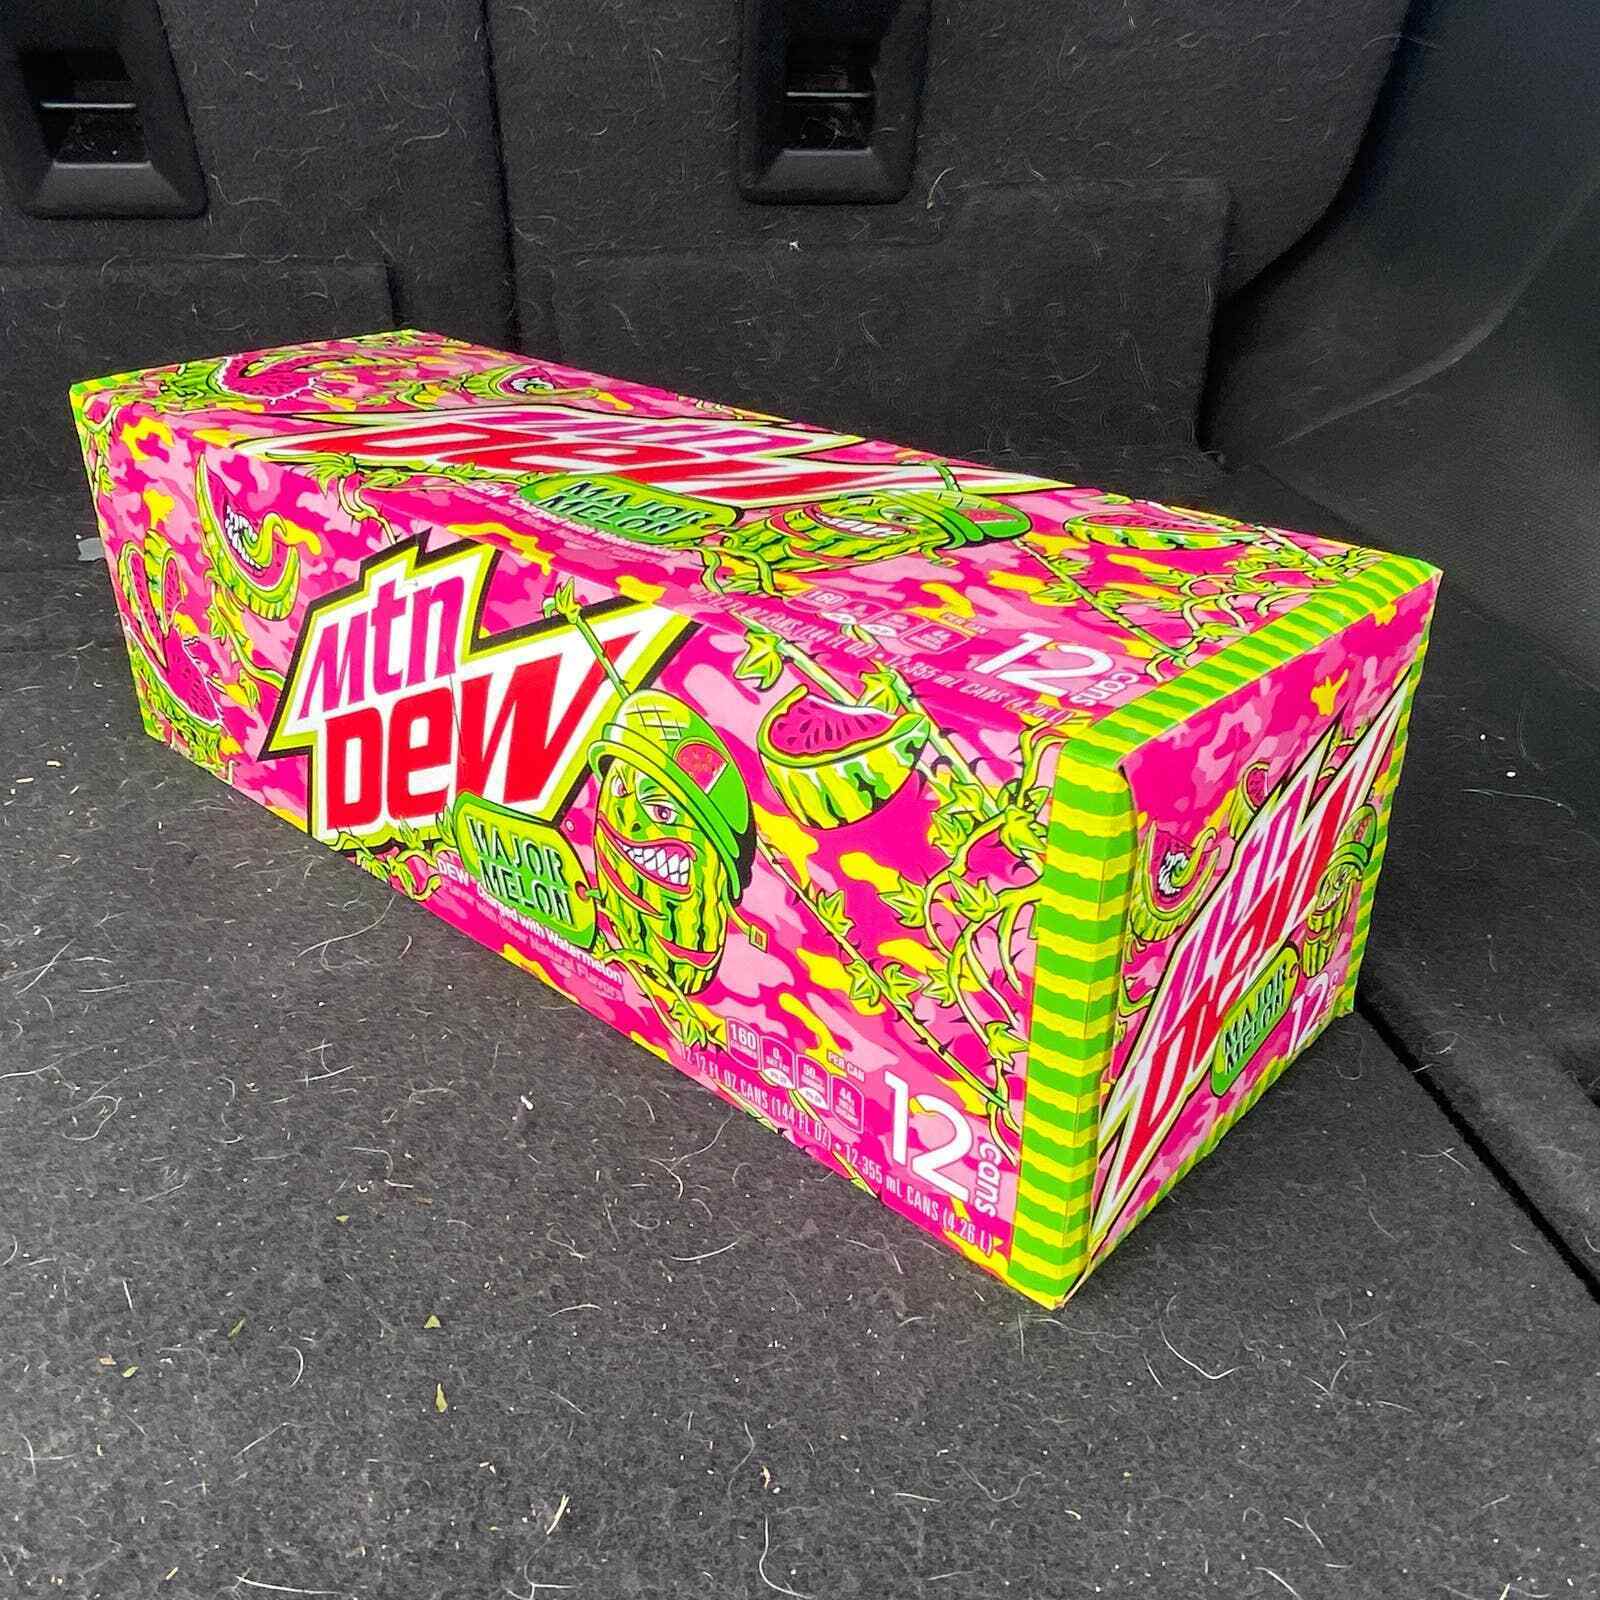 Mtn Dew Major Melon Mountain Dew Cans (12 Cans)